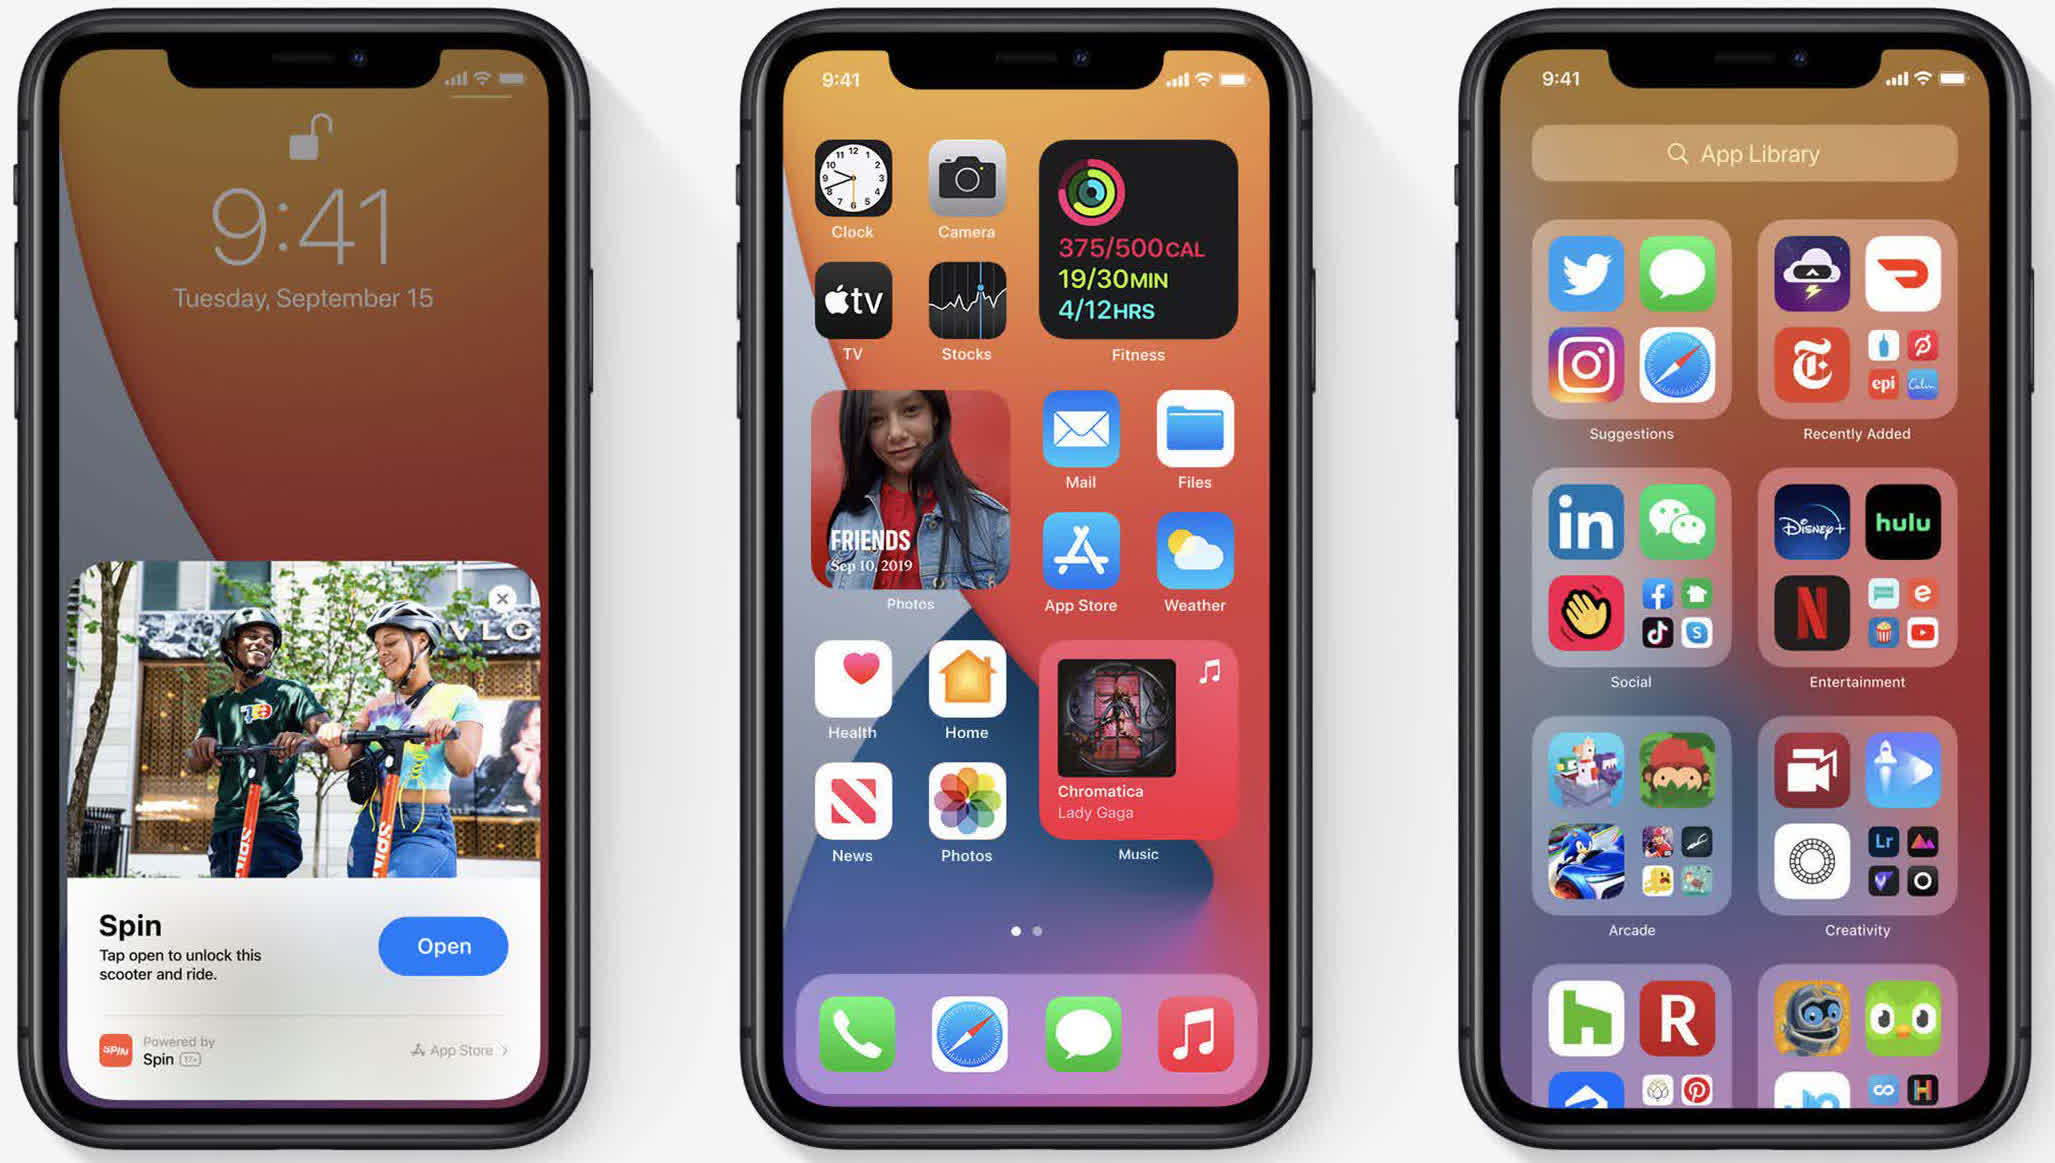 iOS 14.2 is here, with new wallpapers, emoji, and fixes for several known issues